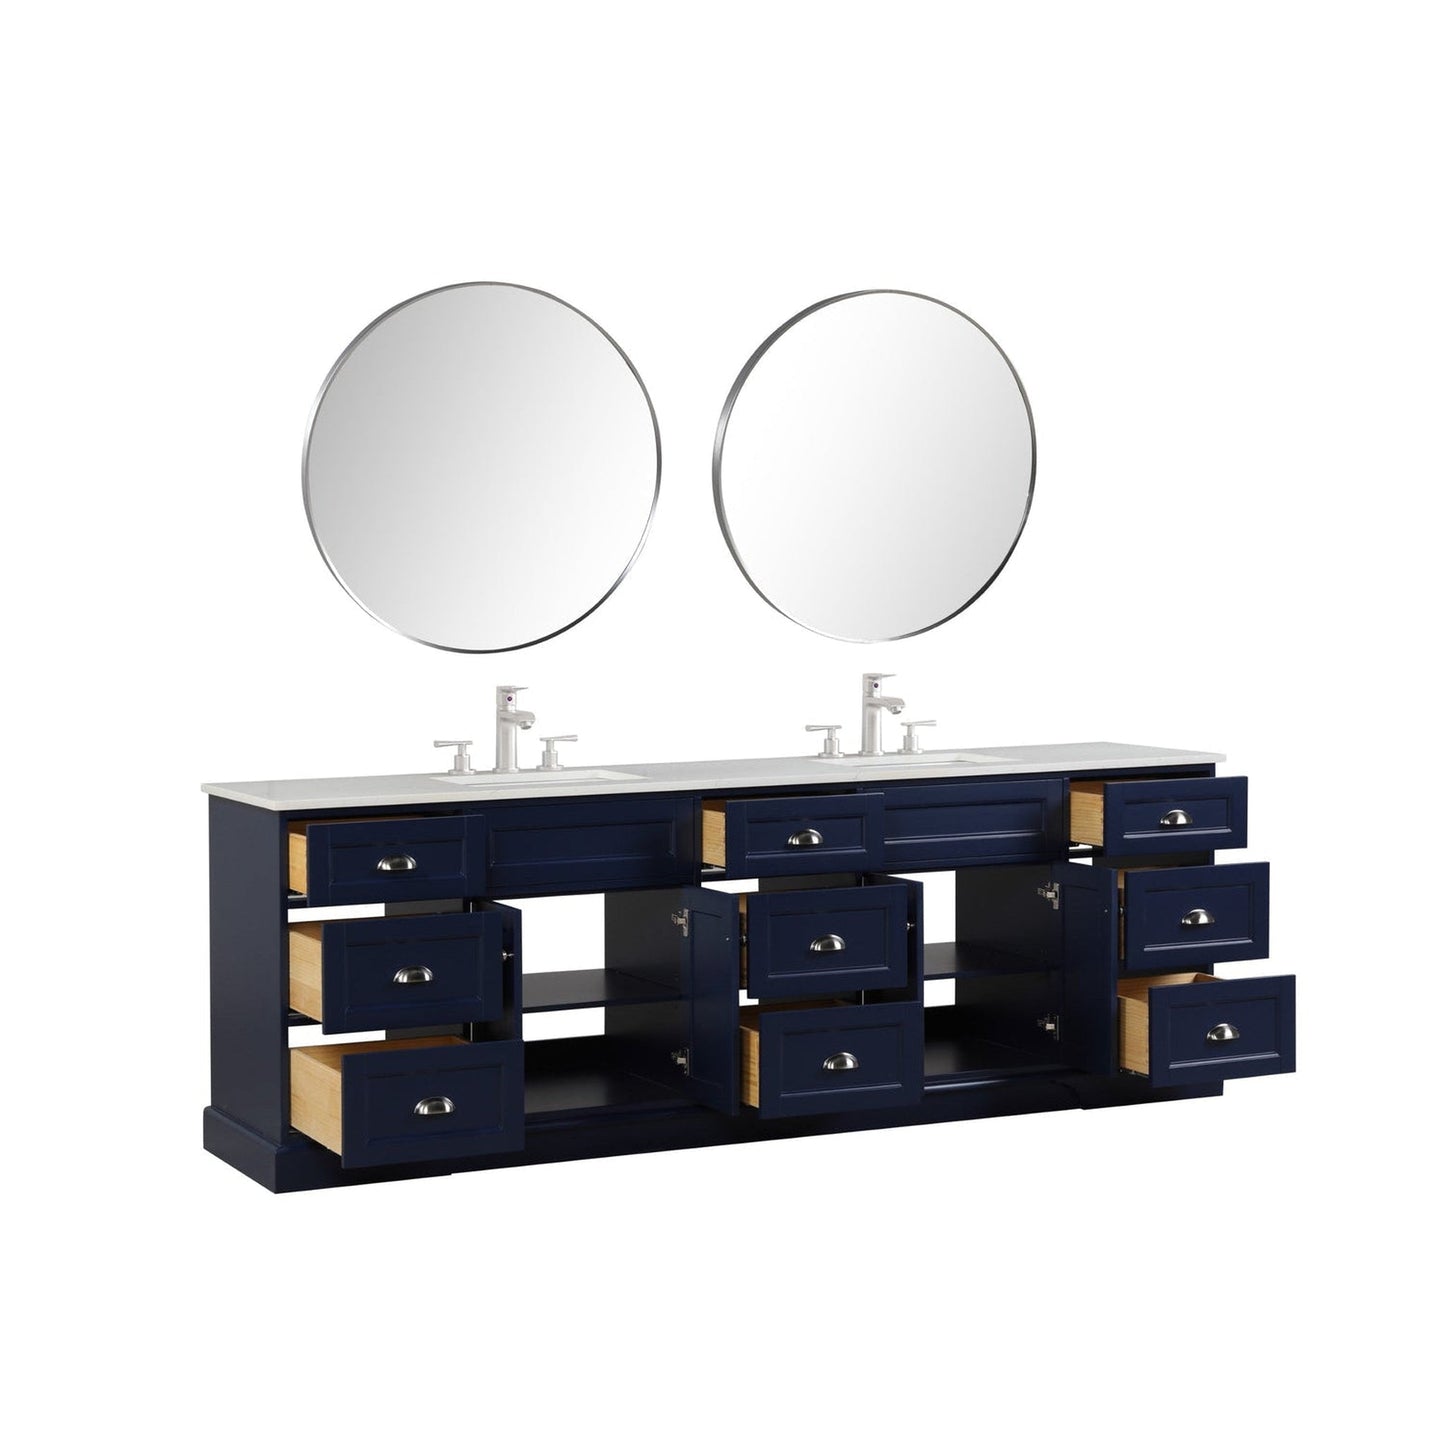 Eviva Epic 96" x 34" Blue Freestanding Bathroom Vanity With Brushed Nickel Hardware and Quartz Countertop With Double Undermount Sink